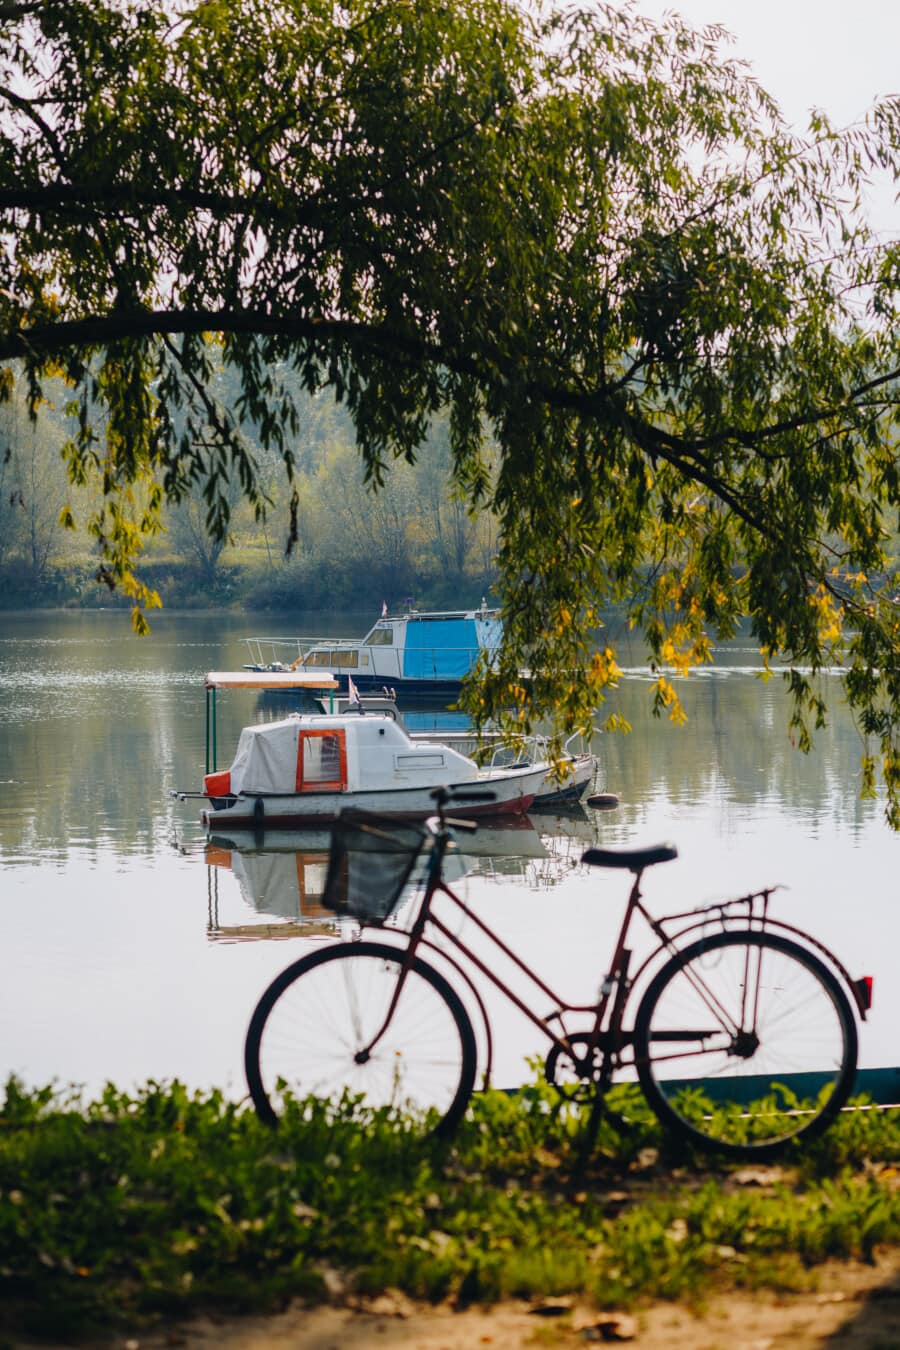 lake, small, yachts, bicycle, water, tree, nature, river, outdoors, park